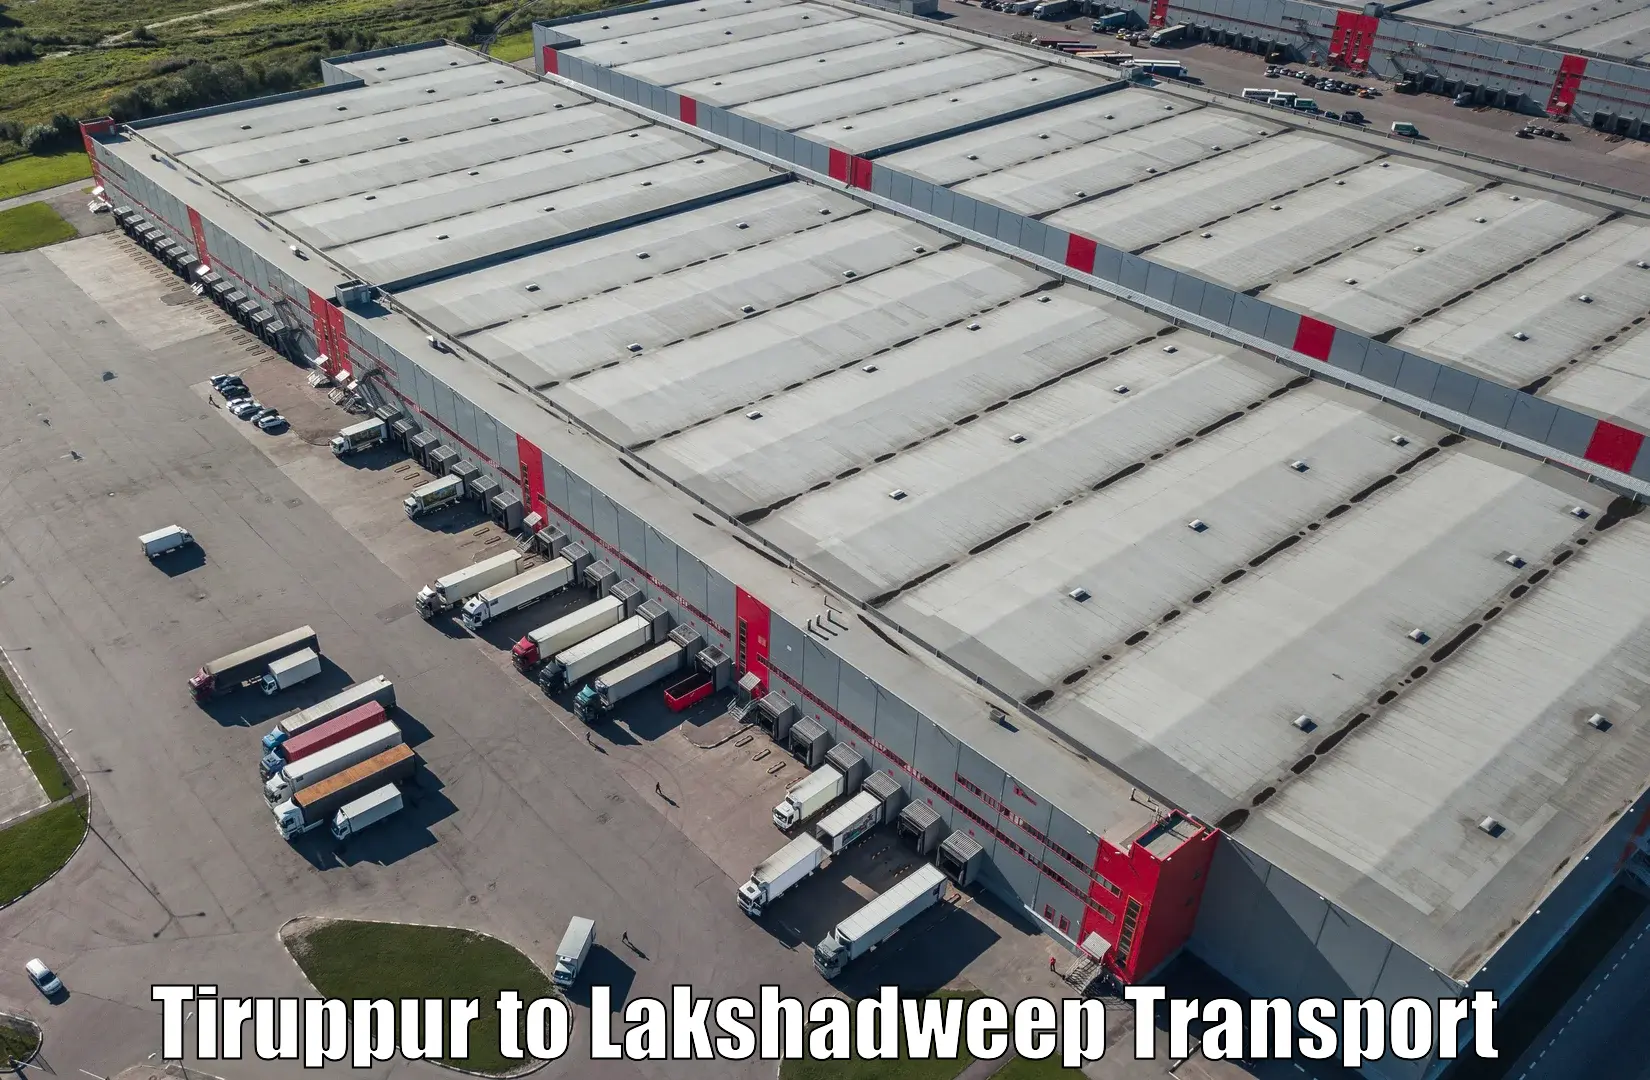 Commercial transport service Tiruppur to Lakshadweep